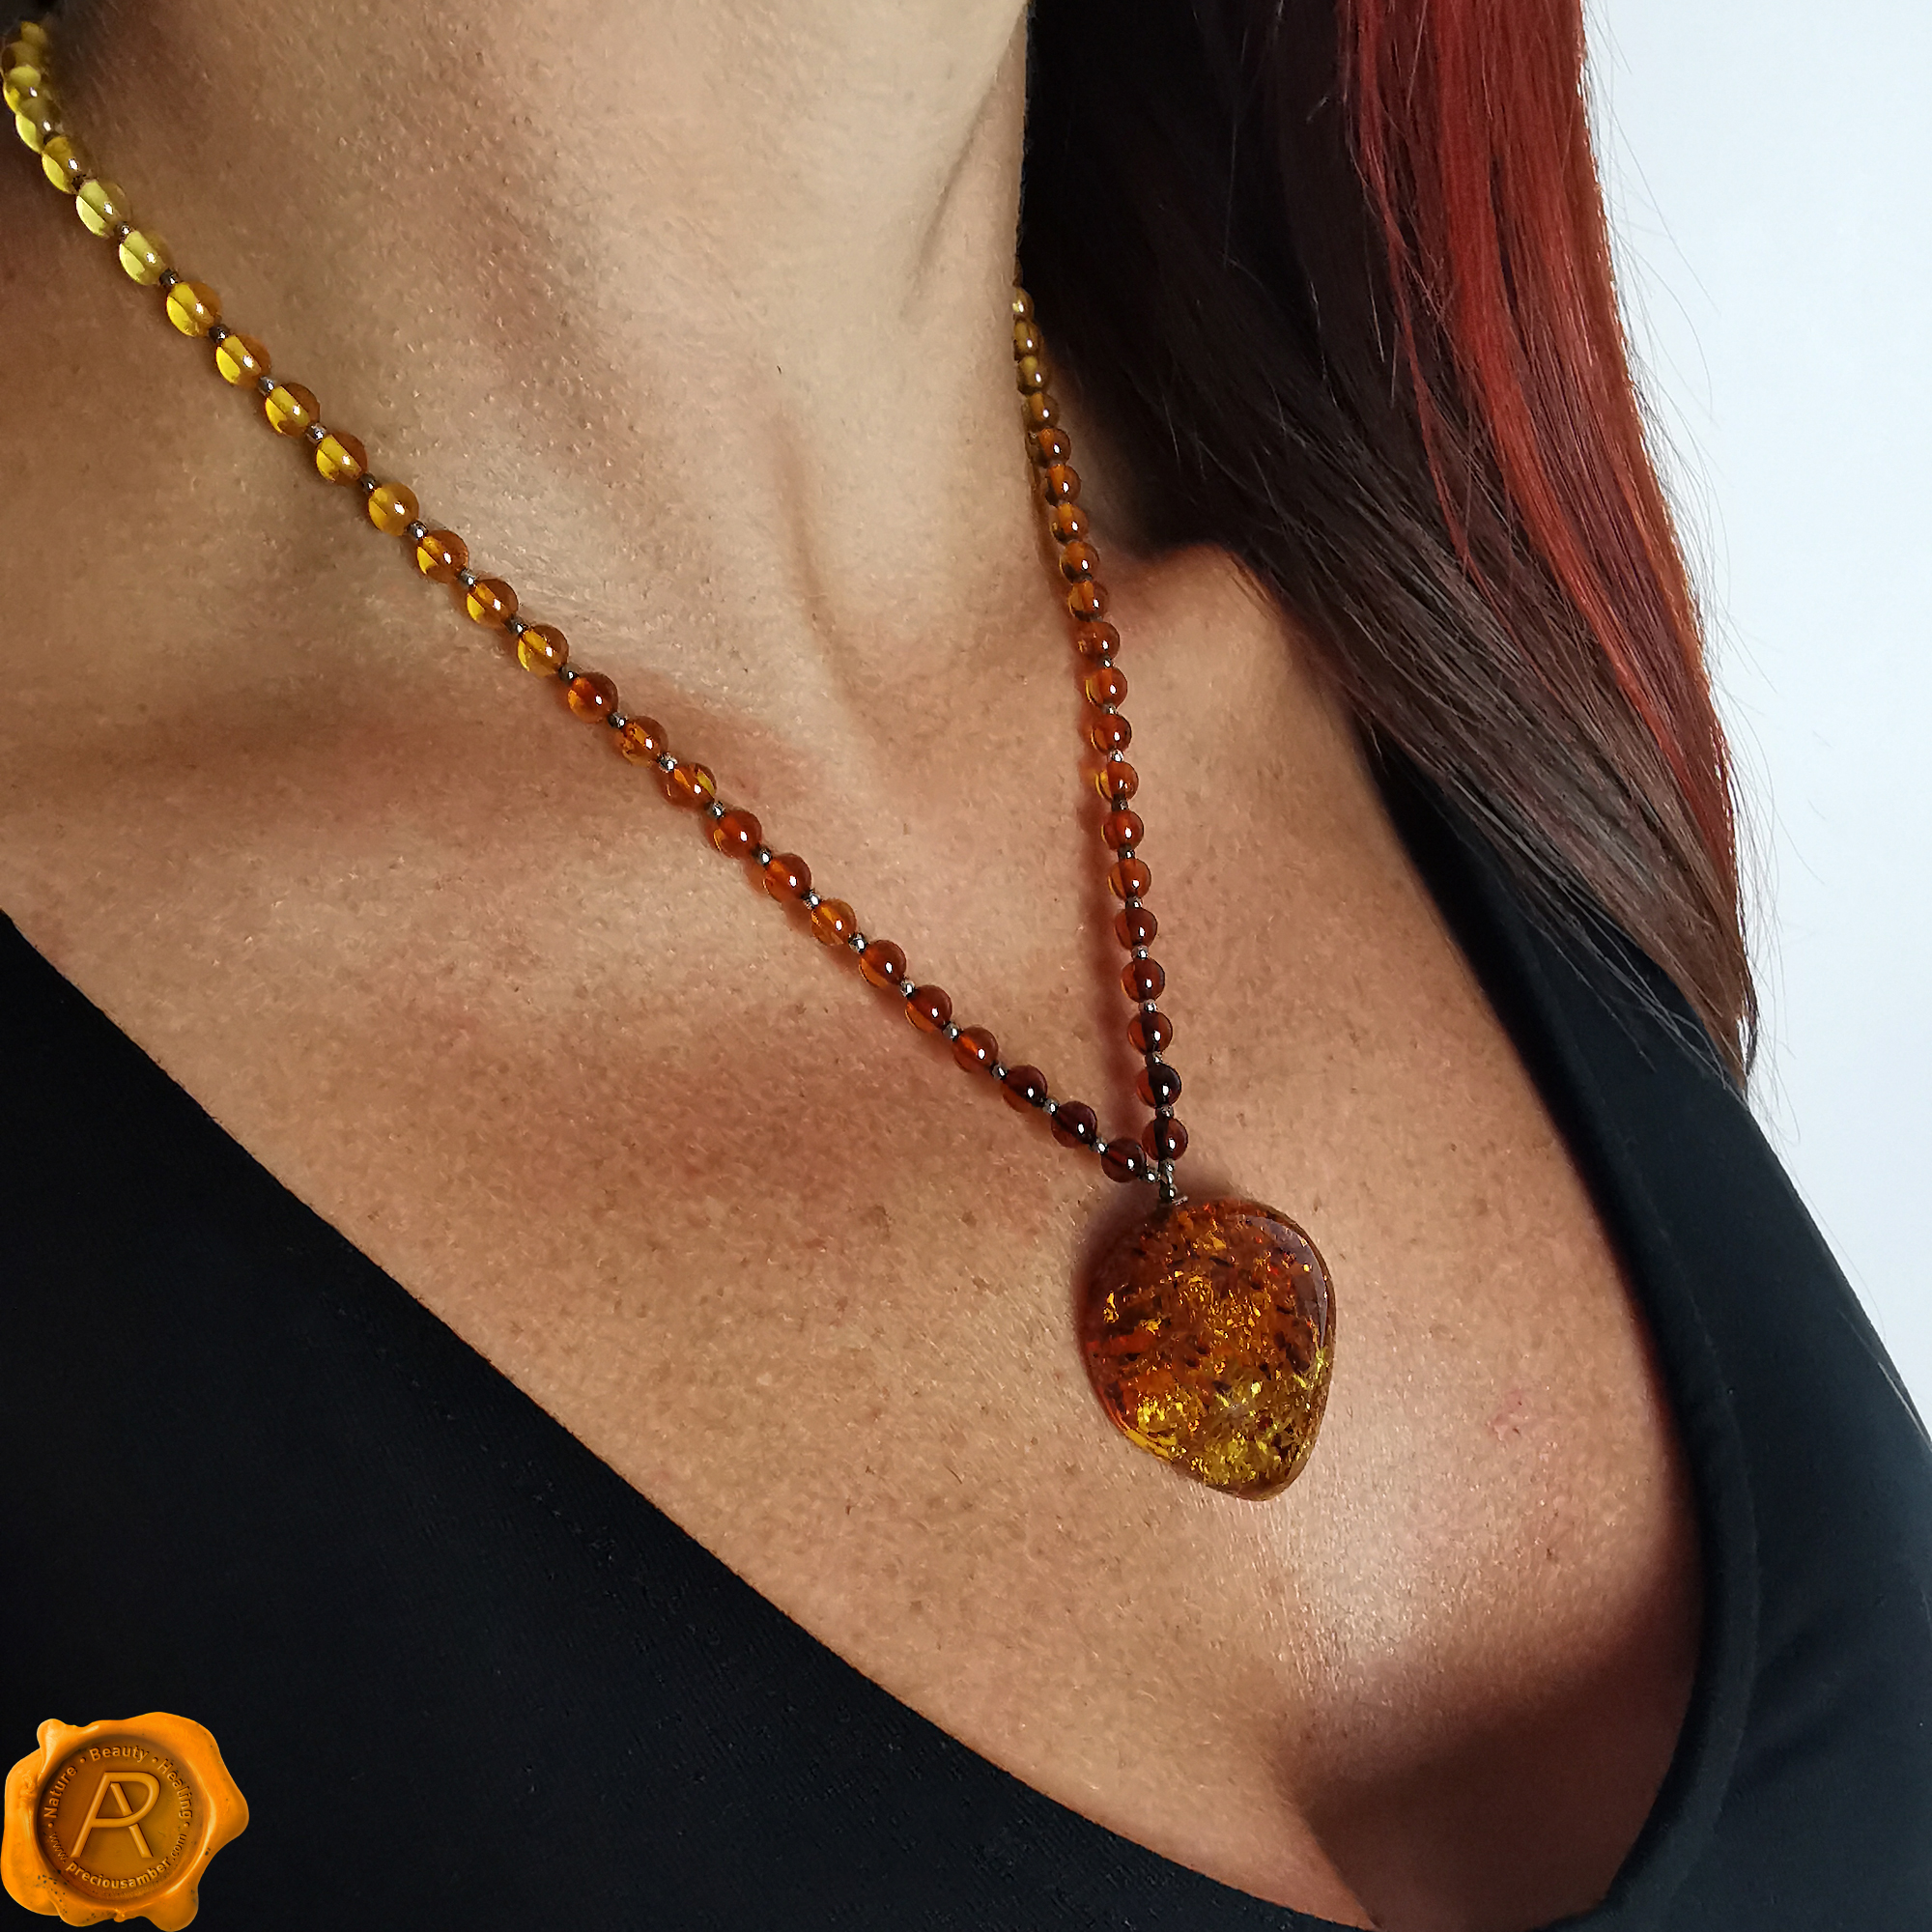 Stunning Vintage Baltic Amber Necklace